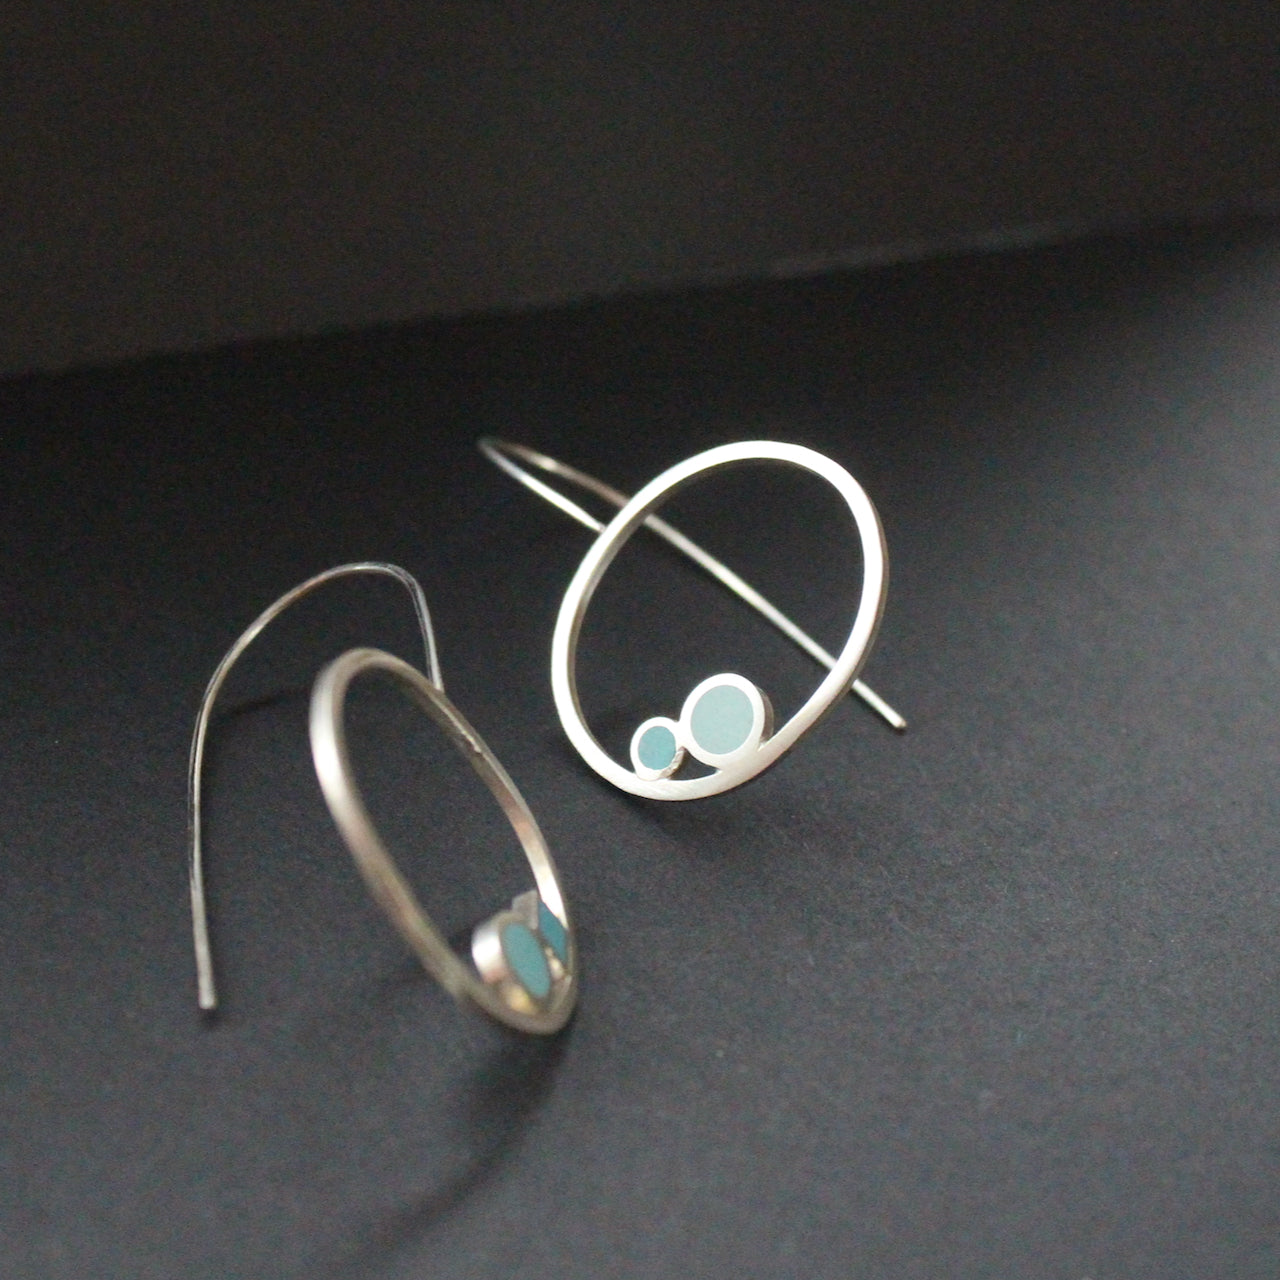 Round drop earrings with 2 dots of turquoise and aqua sitting inside the rings by artist Clare Lloyd.